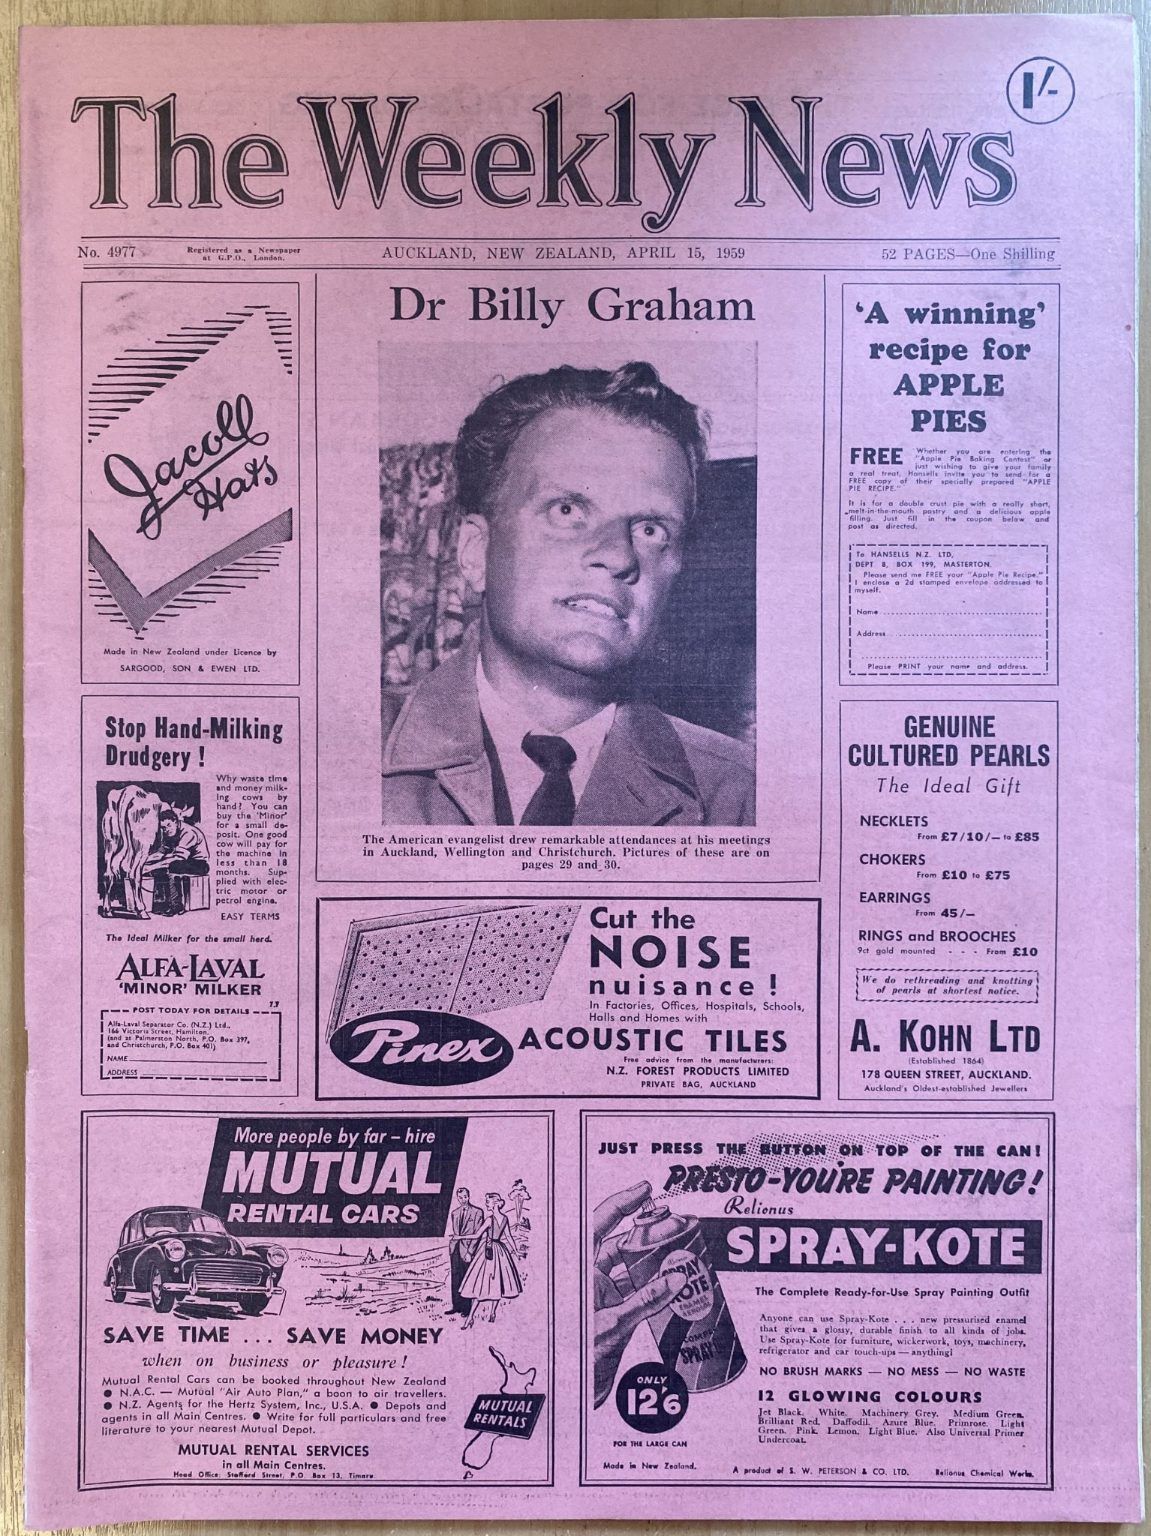 OLD NEWSPAPER: The Weekly News - No. 4977, 15 April 1959